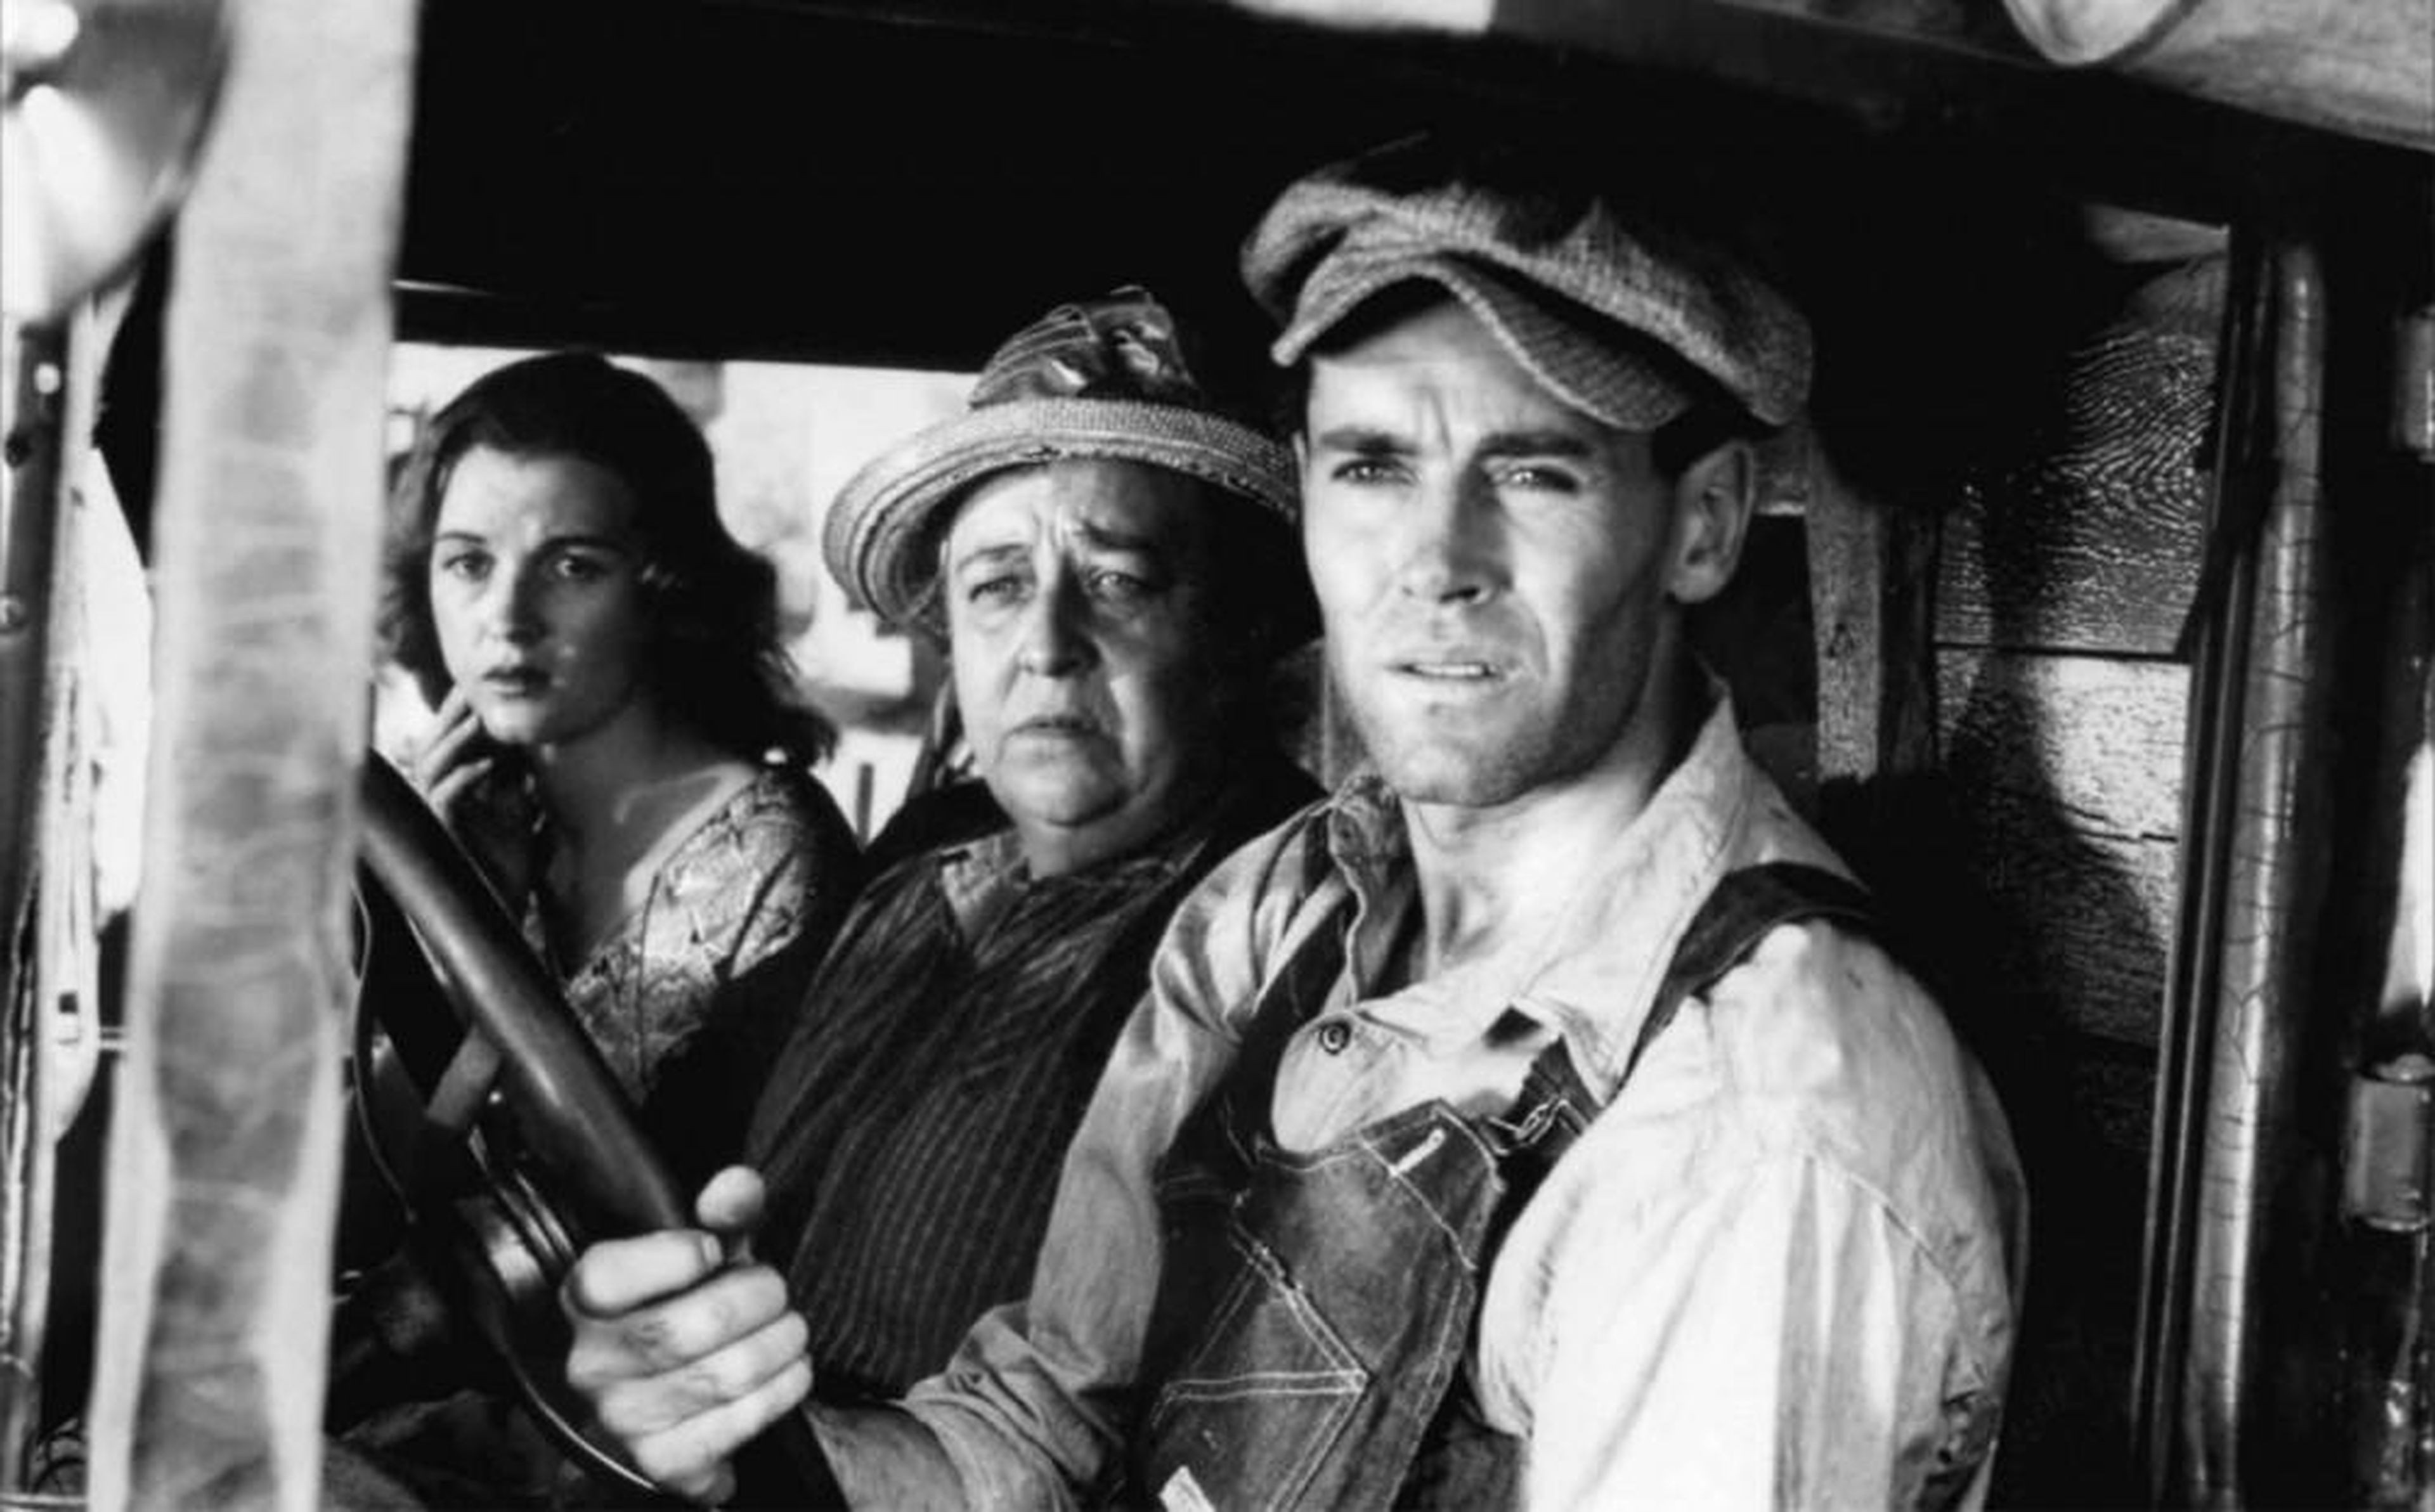 35. "The Grapes of Wrath" (1940)